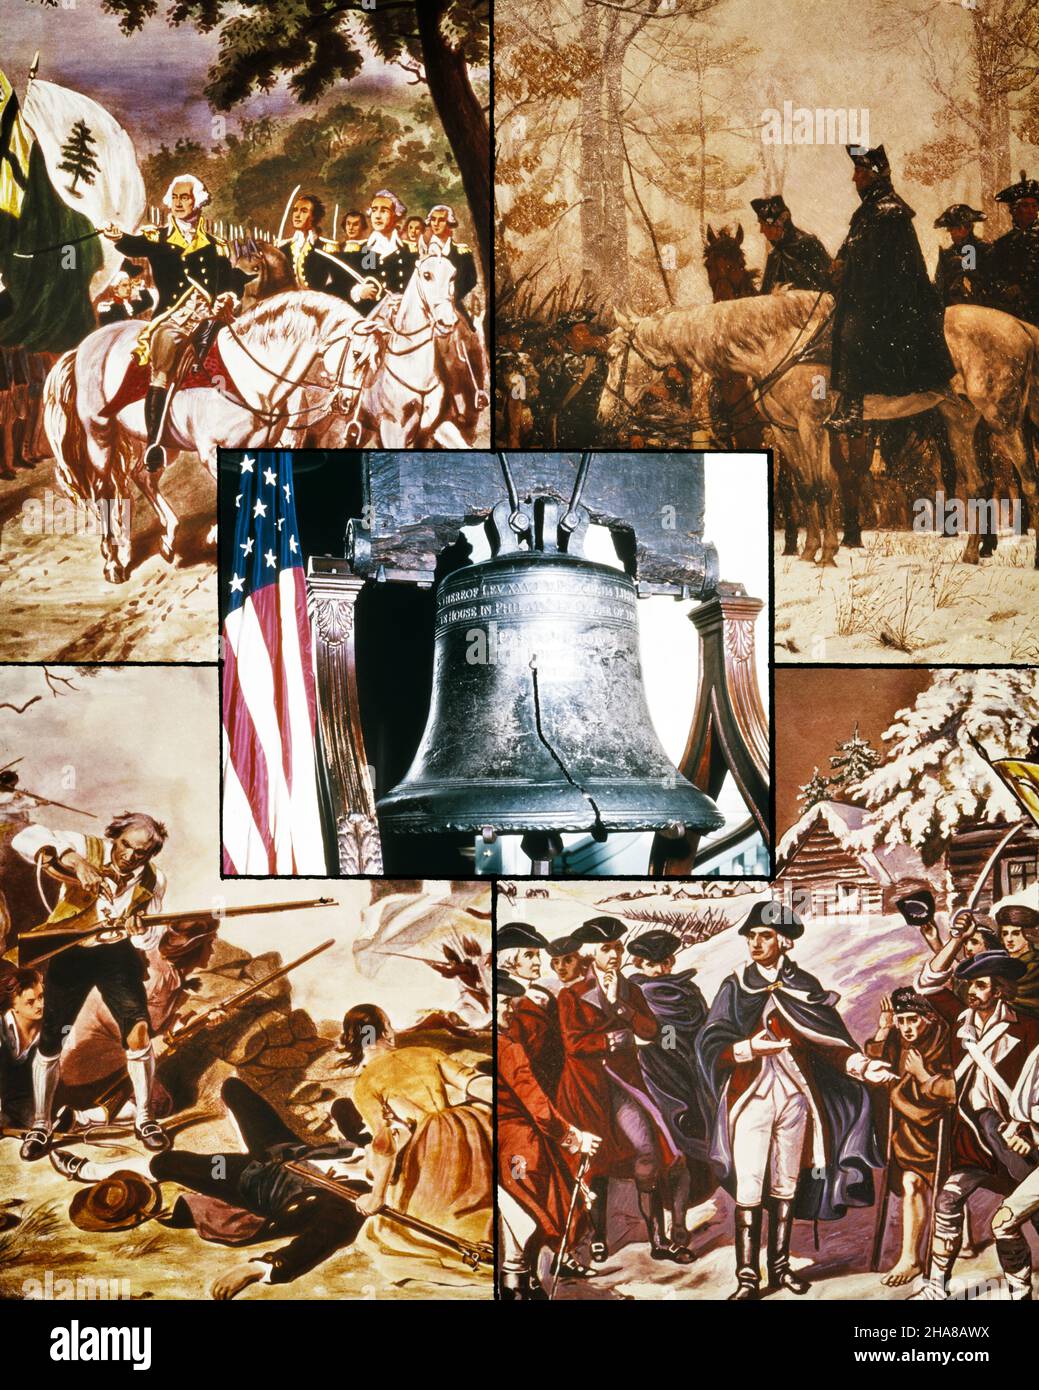 1770s MONTAGE OF VARIOUS AMERICAN REVOLUTIONARY WAR ILLUSTRATIONS WITH LIBERTY BELL IN THE CENTER - kh5775 HAR001 HARS VALLEY FORGE COMPOSITE EXCITEMENT LEADERSHIP PA POLITICIAN PRIDE 1776 AUTHORITY PATRIOT POLITICS WAR OF INDEPENDENCE CONCEPTUAL FIFE PATRIOTIC REVOLUTIONARY WAR VARIOUS GEORGE WASHINGTON REVOLT AMERICAN REVOLUTIONARY WAR 1770s COLONIES MA PATRIOTISM STATESMAN BATTLE OF LEXINGTON FOUNDING FATHER HAR001 OLD FASHIONED VIRGINIAN Stock Photo